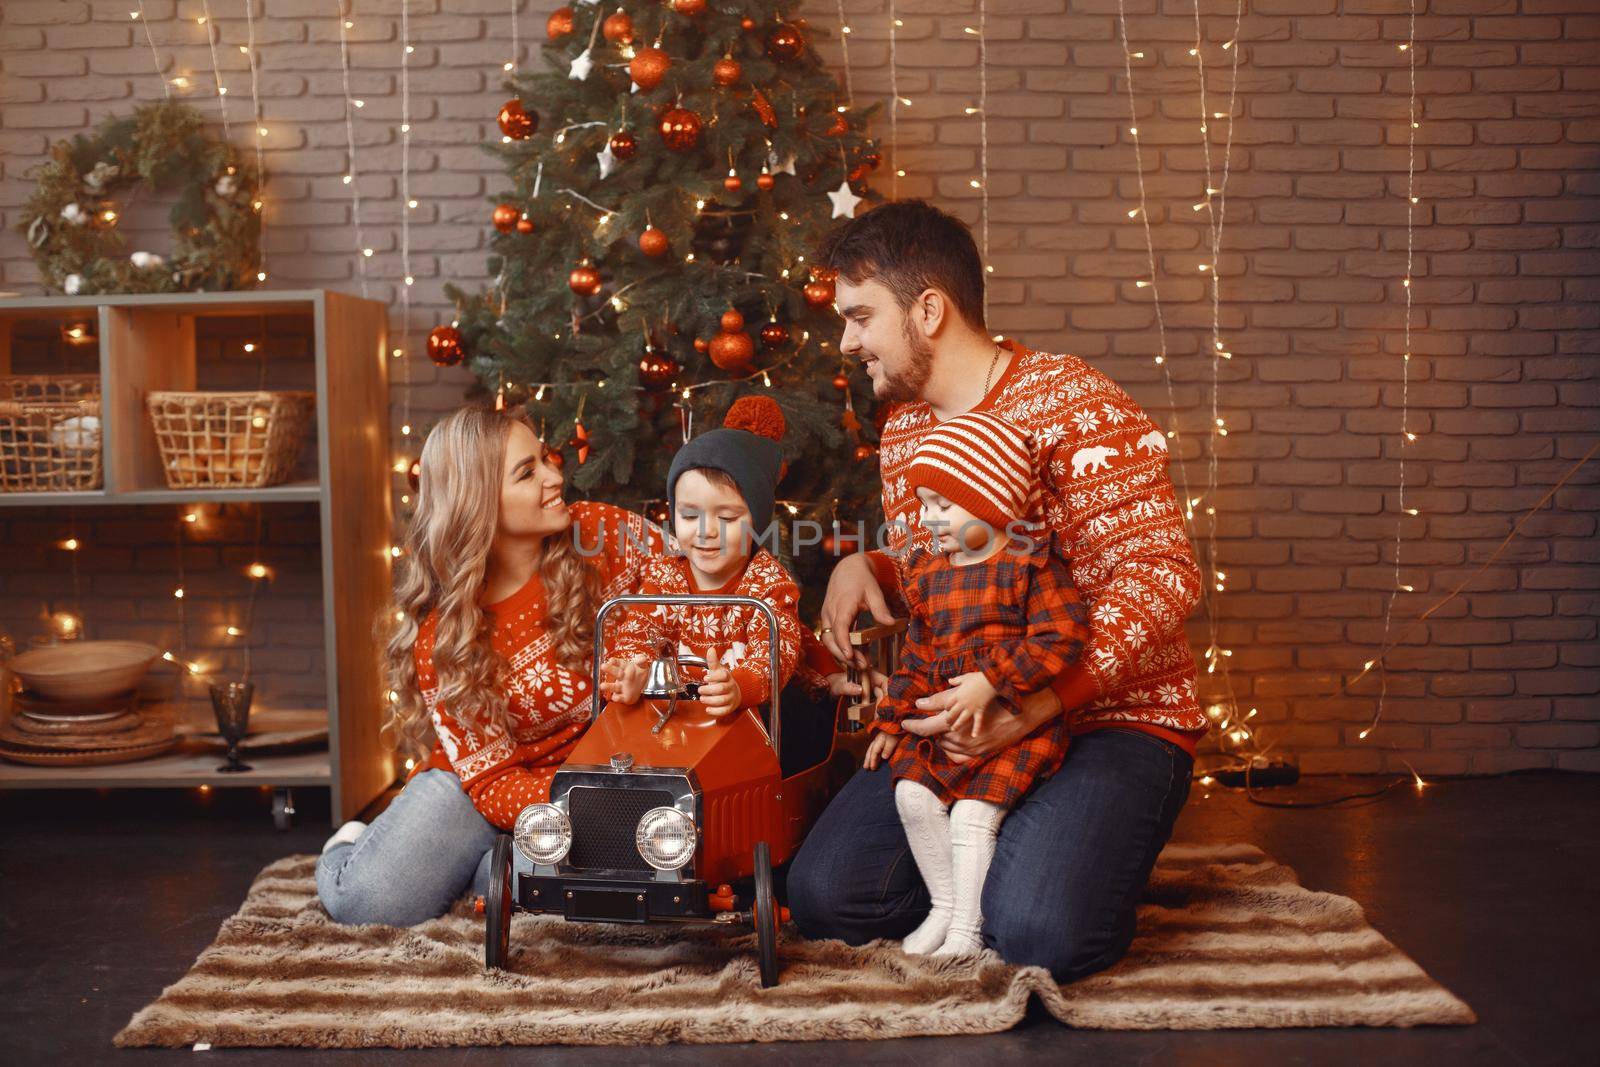 People reparing for Christmas. People playing with their daughter. Family is resting in a festive room. Child in a red dress.